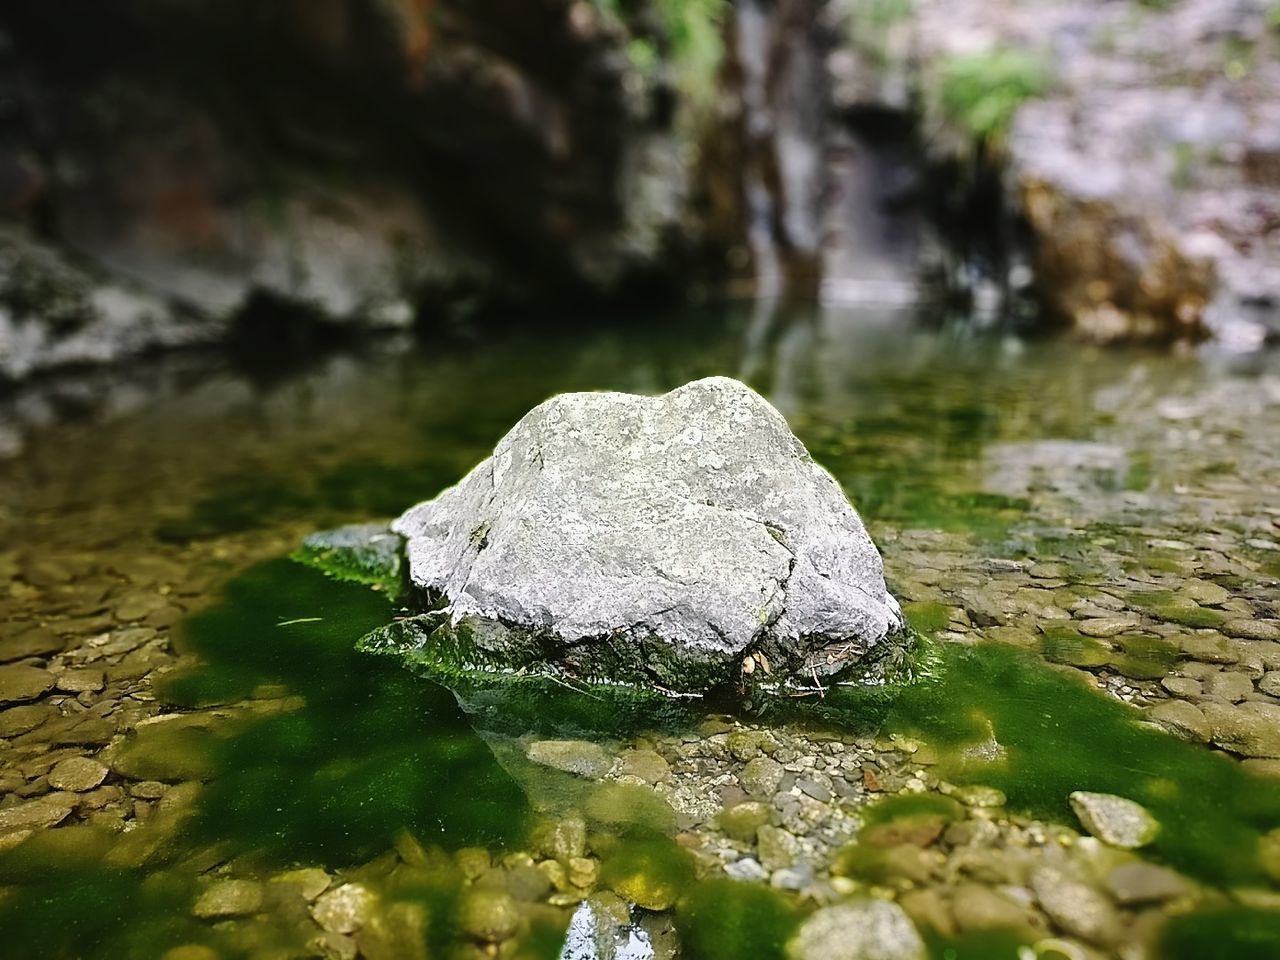 CLOSE-UP OF ROCK ON RIVER